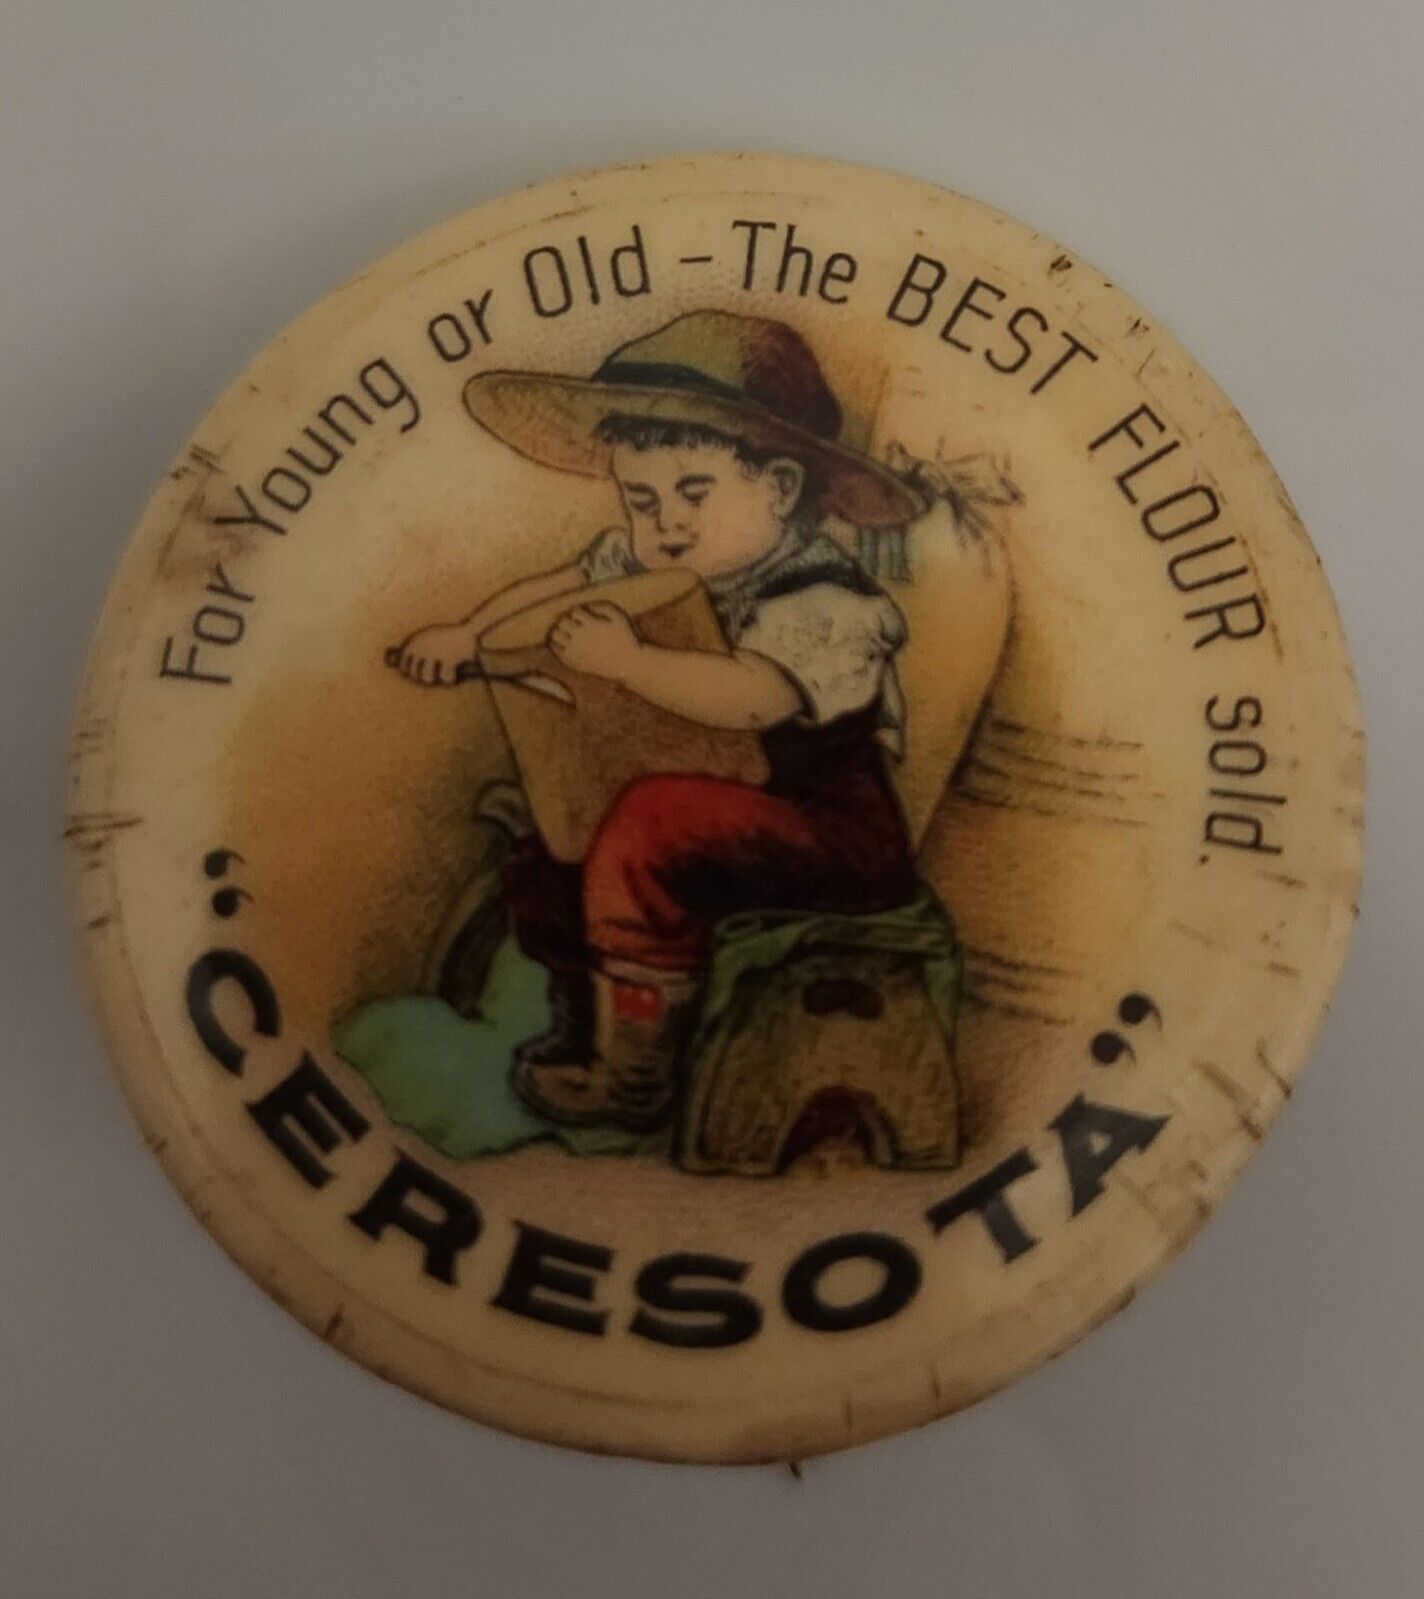 Vintage CERESOTA FLOUR Pin For Young or Old the Best Flour Sold Little Boy Pin